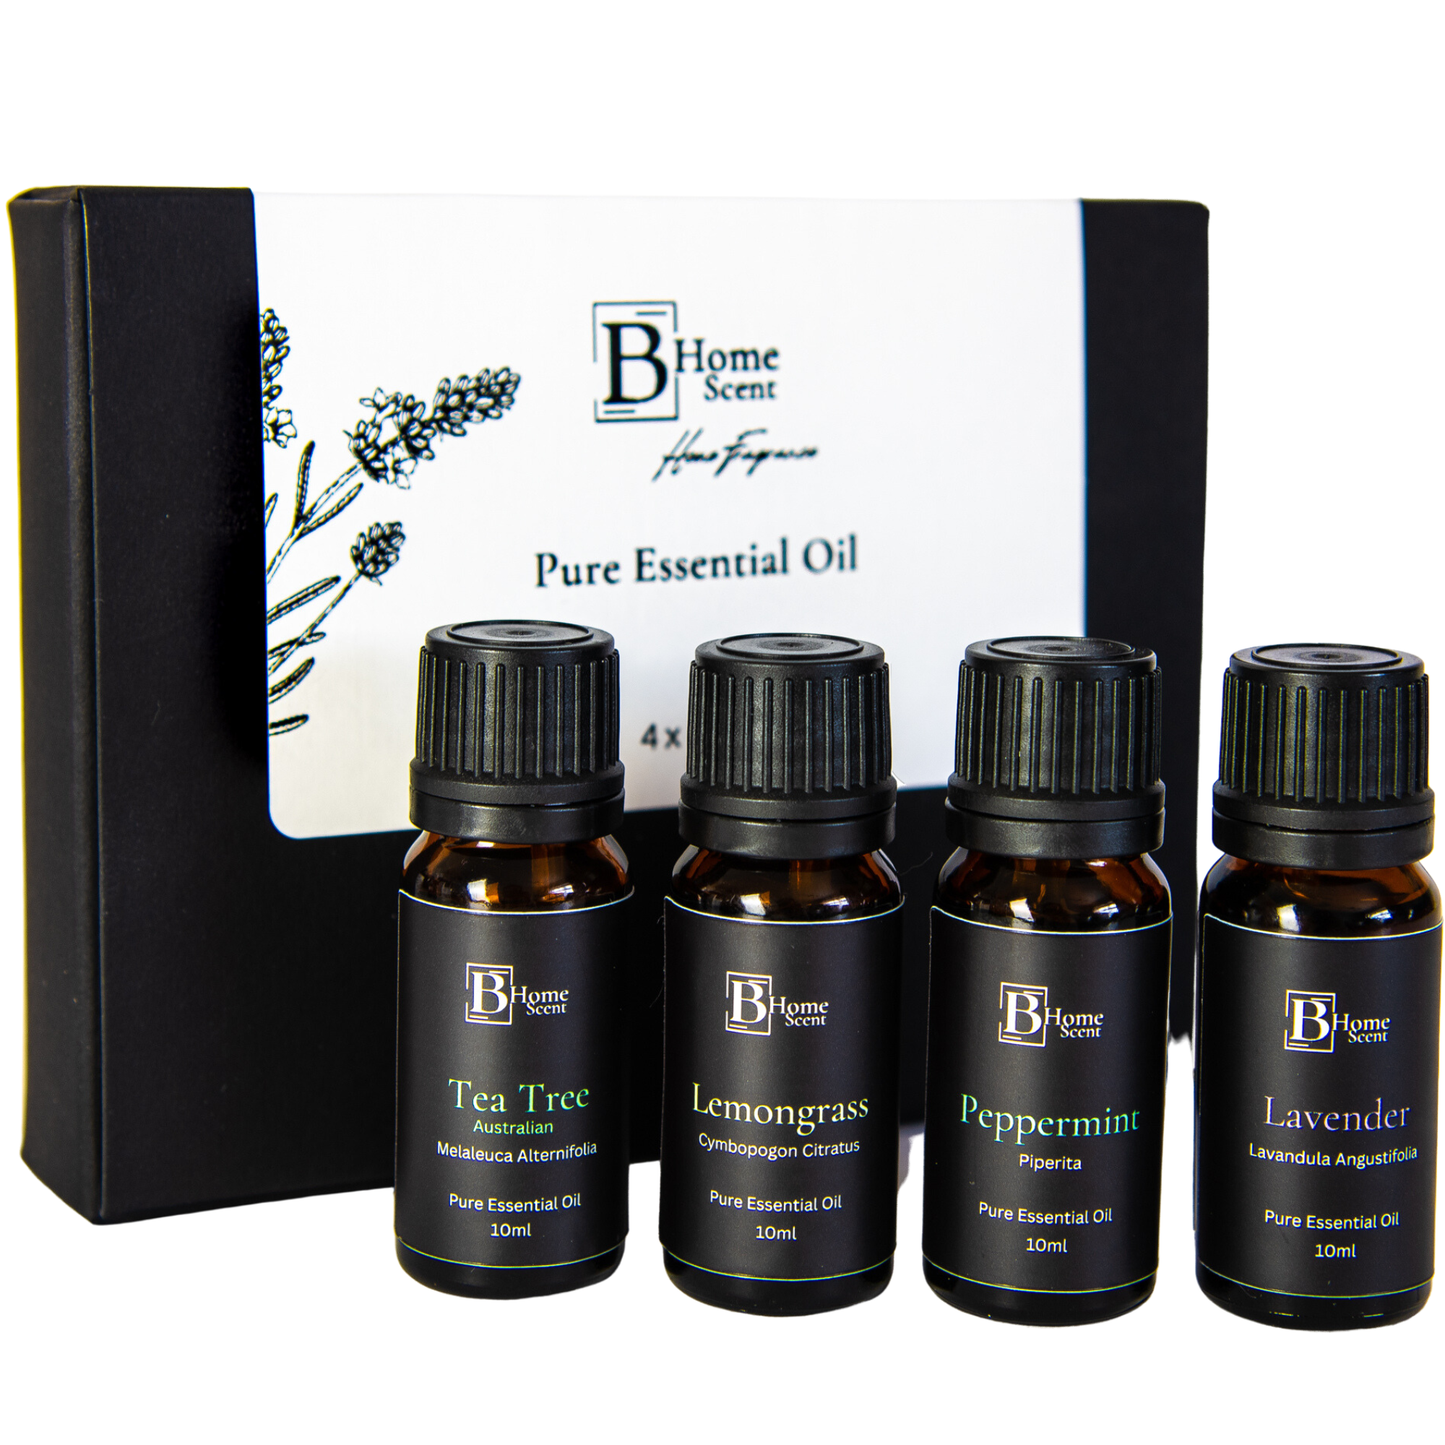 Essential Oil Set - 4 x 10ml - Lavender, Tea Tree, Lemongrass and Peppermint - 100% Pure Essential Oil - Essential Oils for Diffuser, Home, Aromatherapy